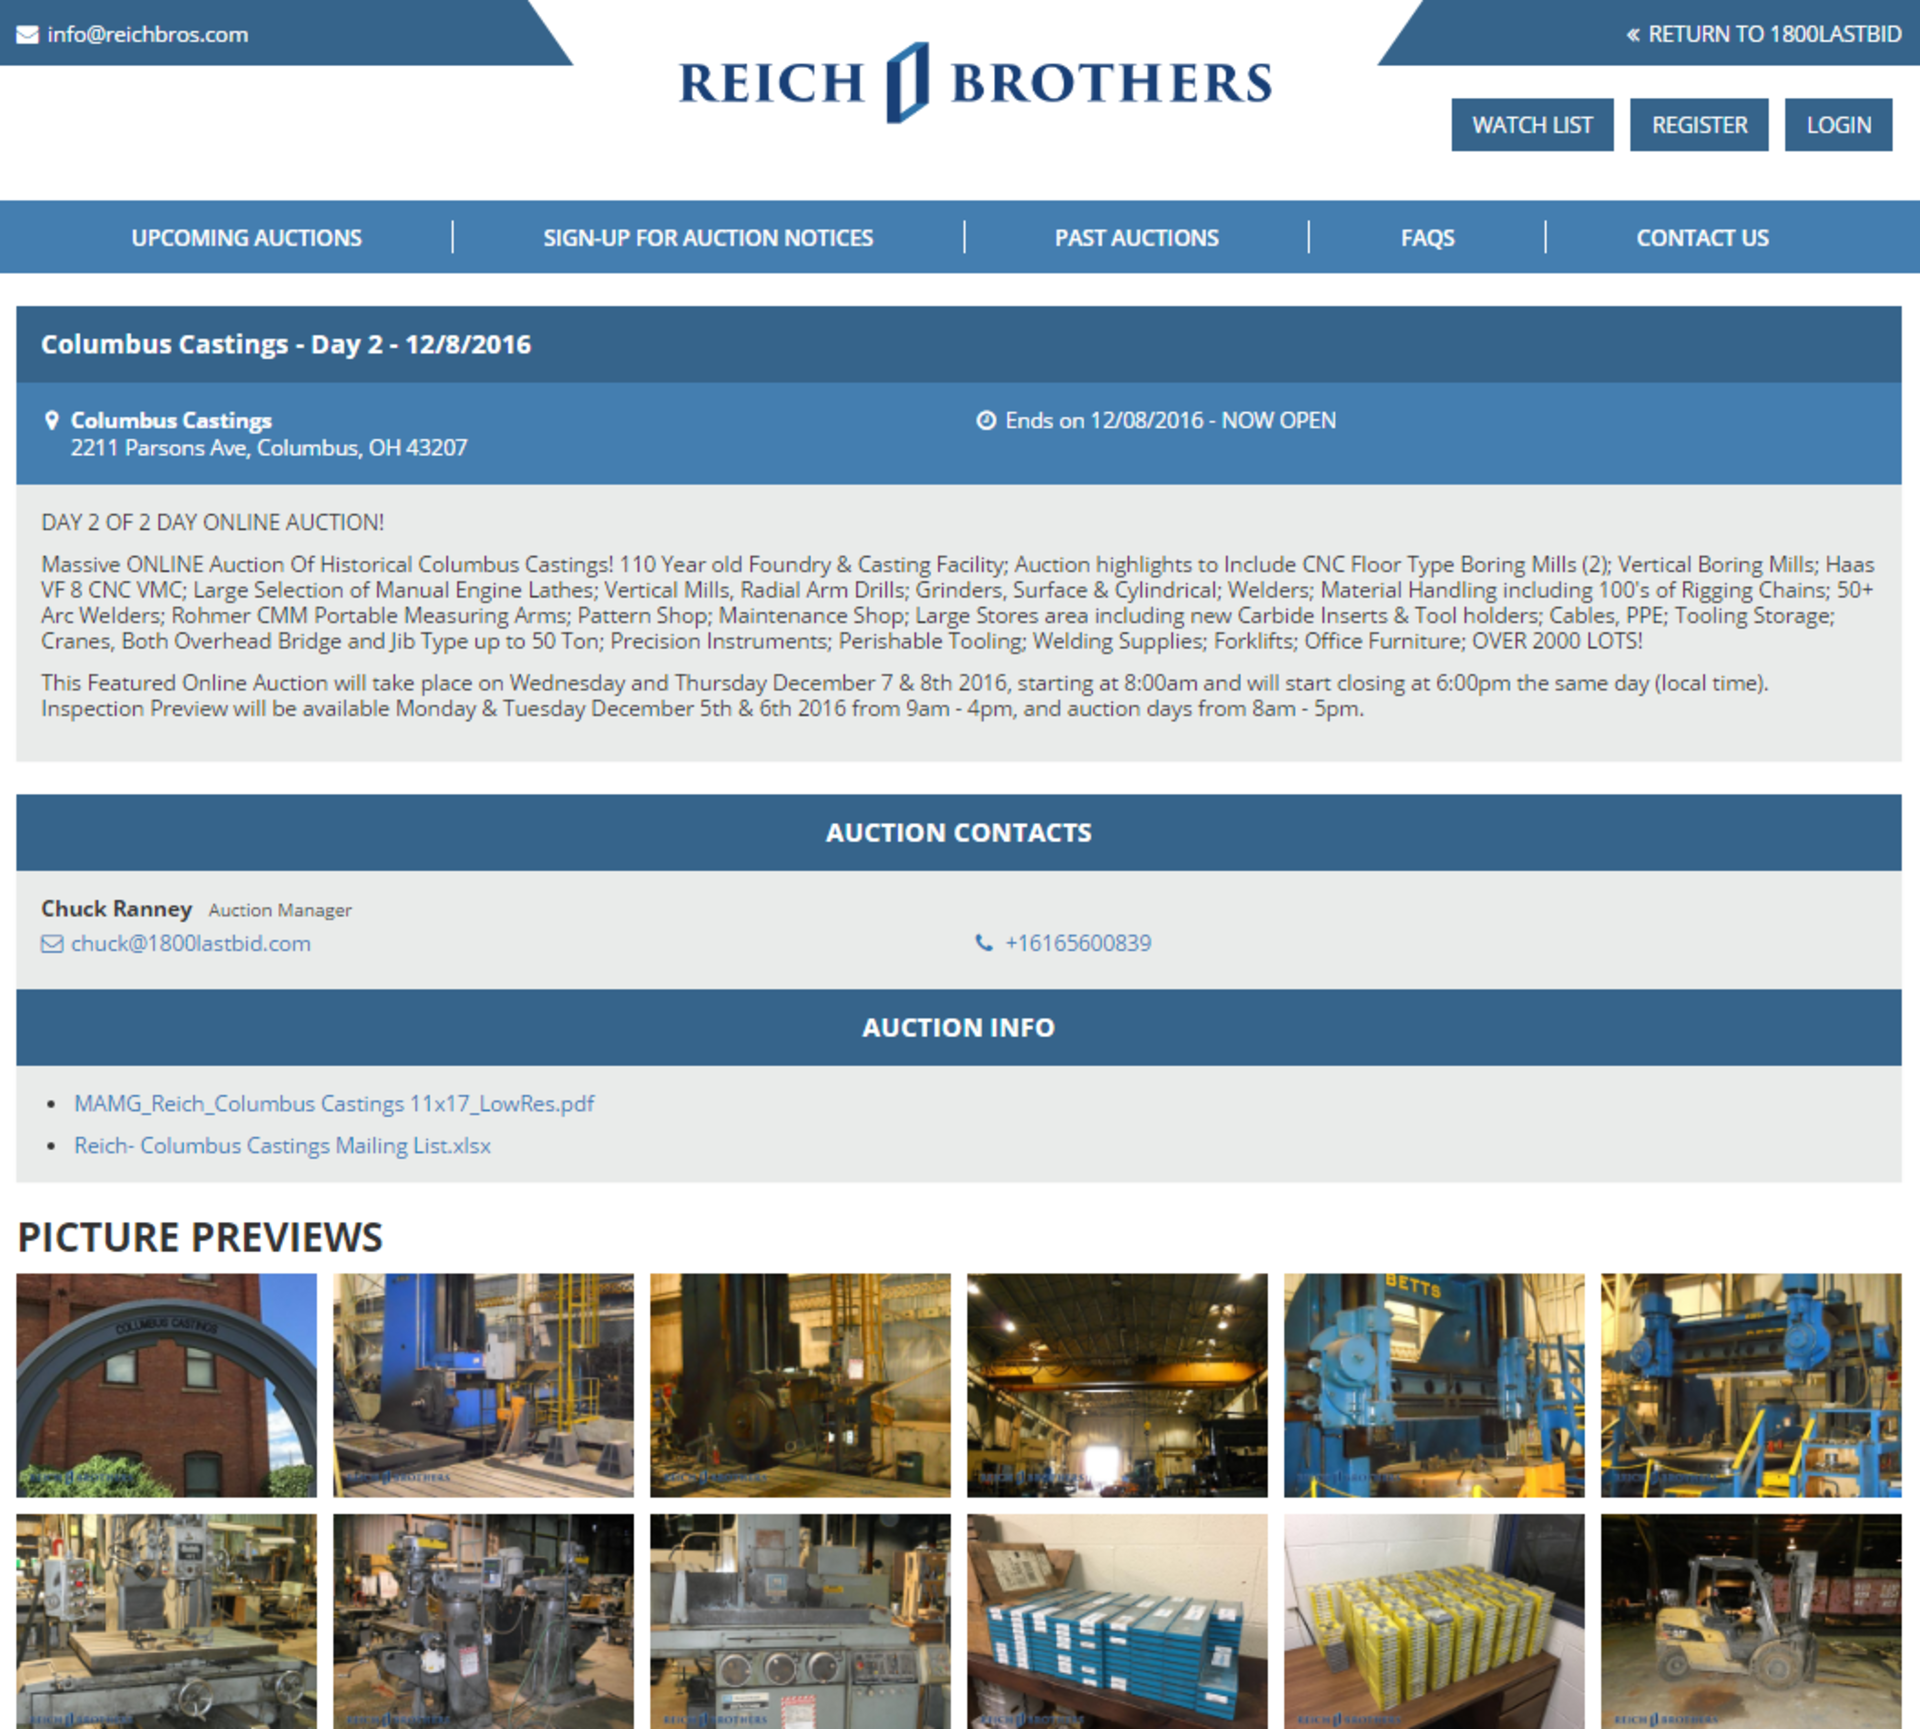 ***** THIS AUCTION IS BEING CONDUCTED ON THE REICH BROTHERS' WEBSITE ***** - Image 3 of 3